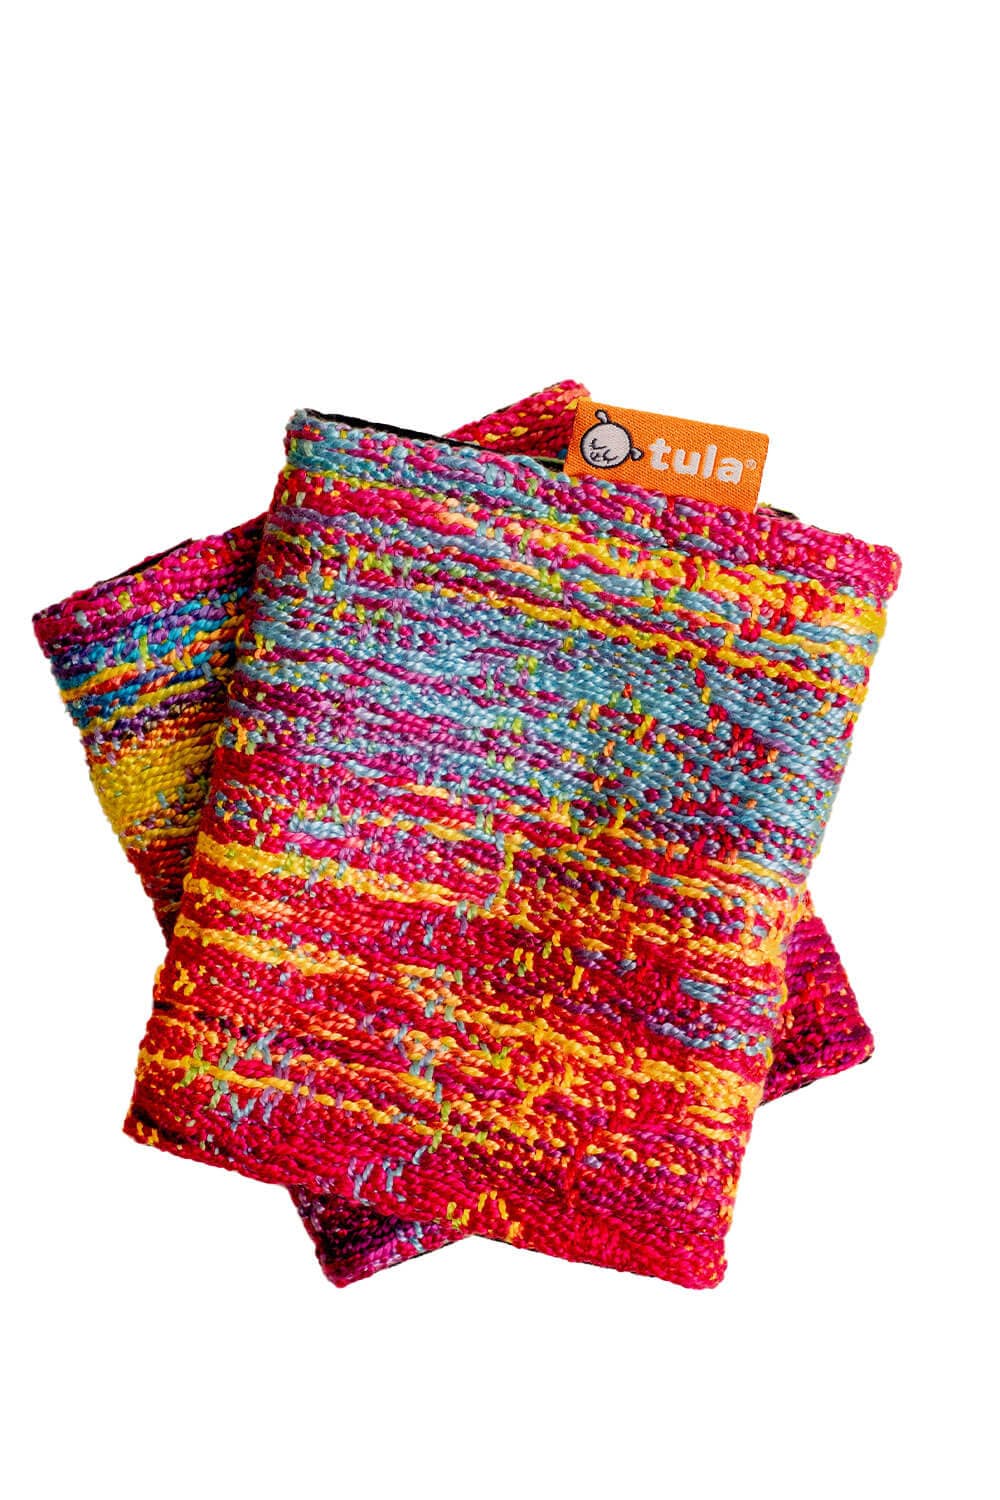 Color Explosion - Signature Handwoven Baby Carrier Strap Cover